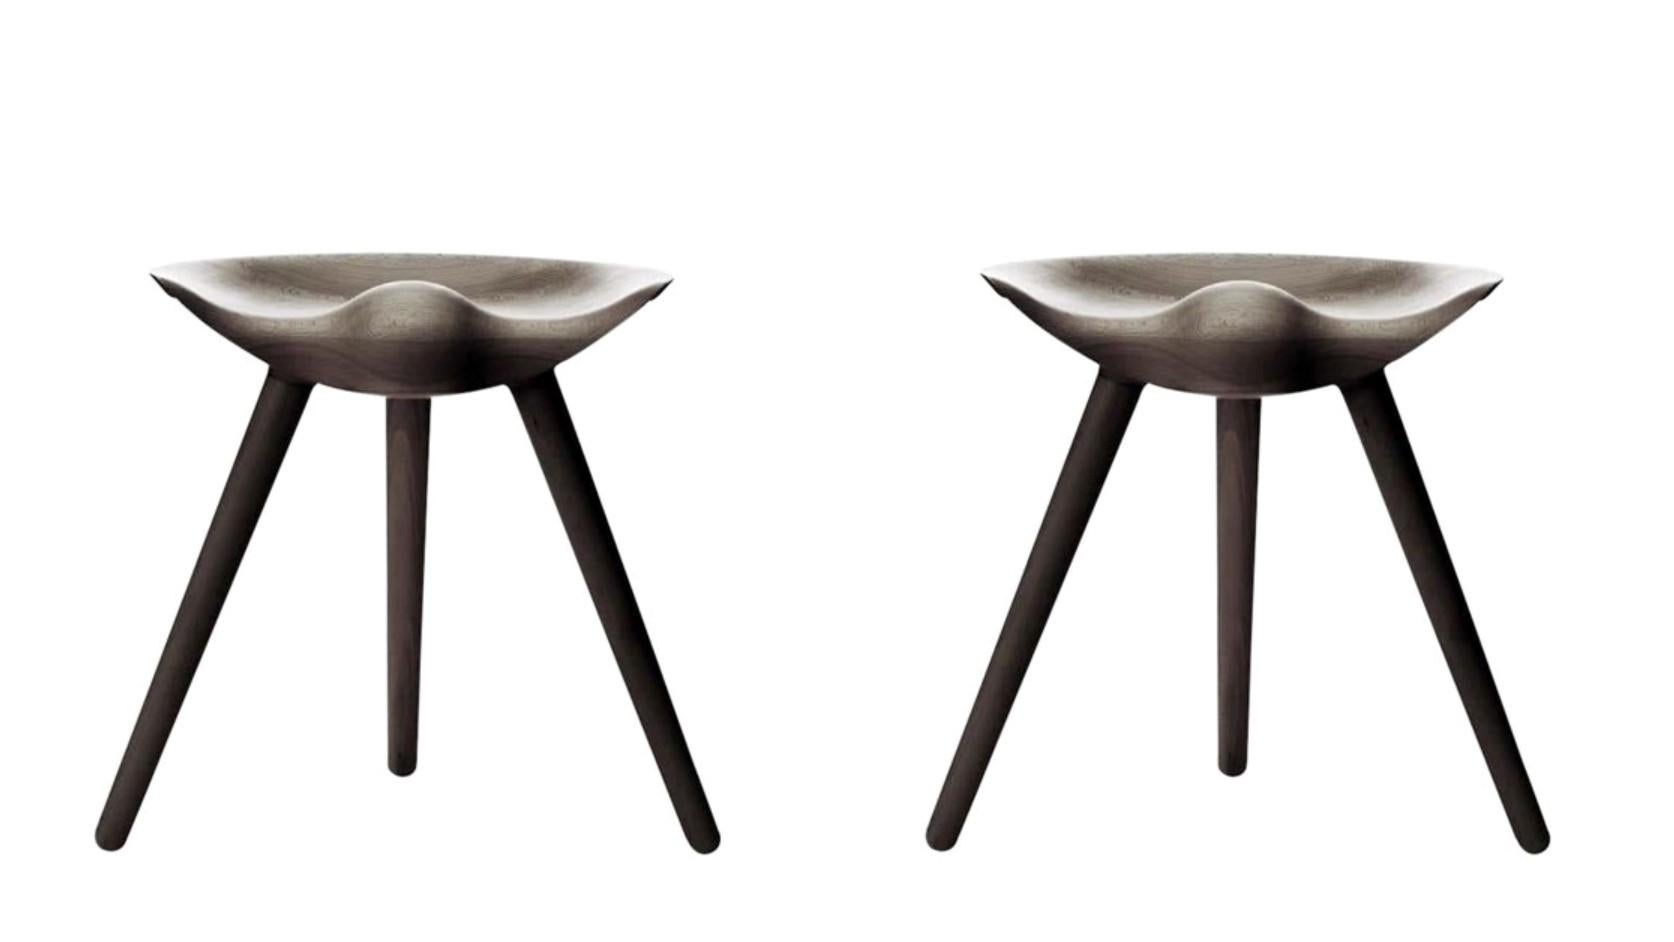 Set of 2 ML 42 brown oak stools by Lassen.
Dimensions: H 48 x W 36 x L 55.5 cm.
Materials: Oak.

In 1942 Mogens Lassen designed the Stool ML42 as a piece for a furniture exhibition held at the Danish Museum of Decorative Art. He took inspiration